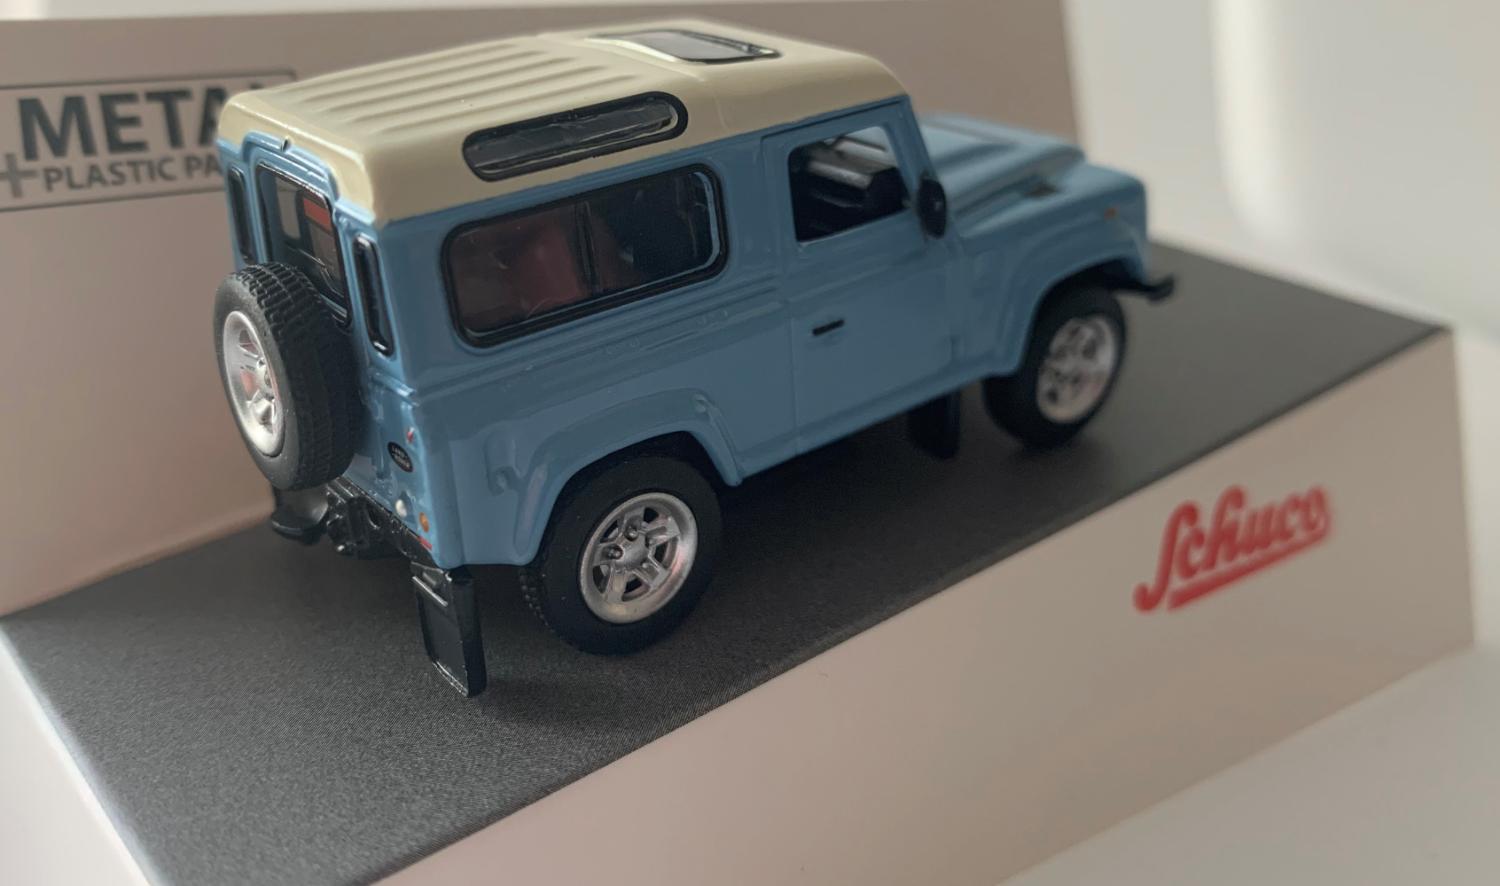 Land Rover Defender in light blue 1:64 scale model from Schuco